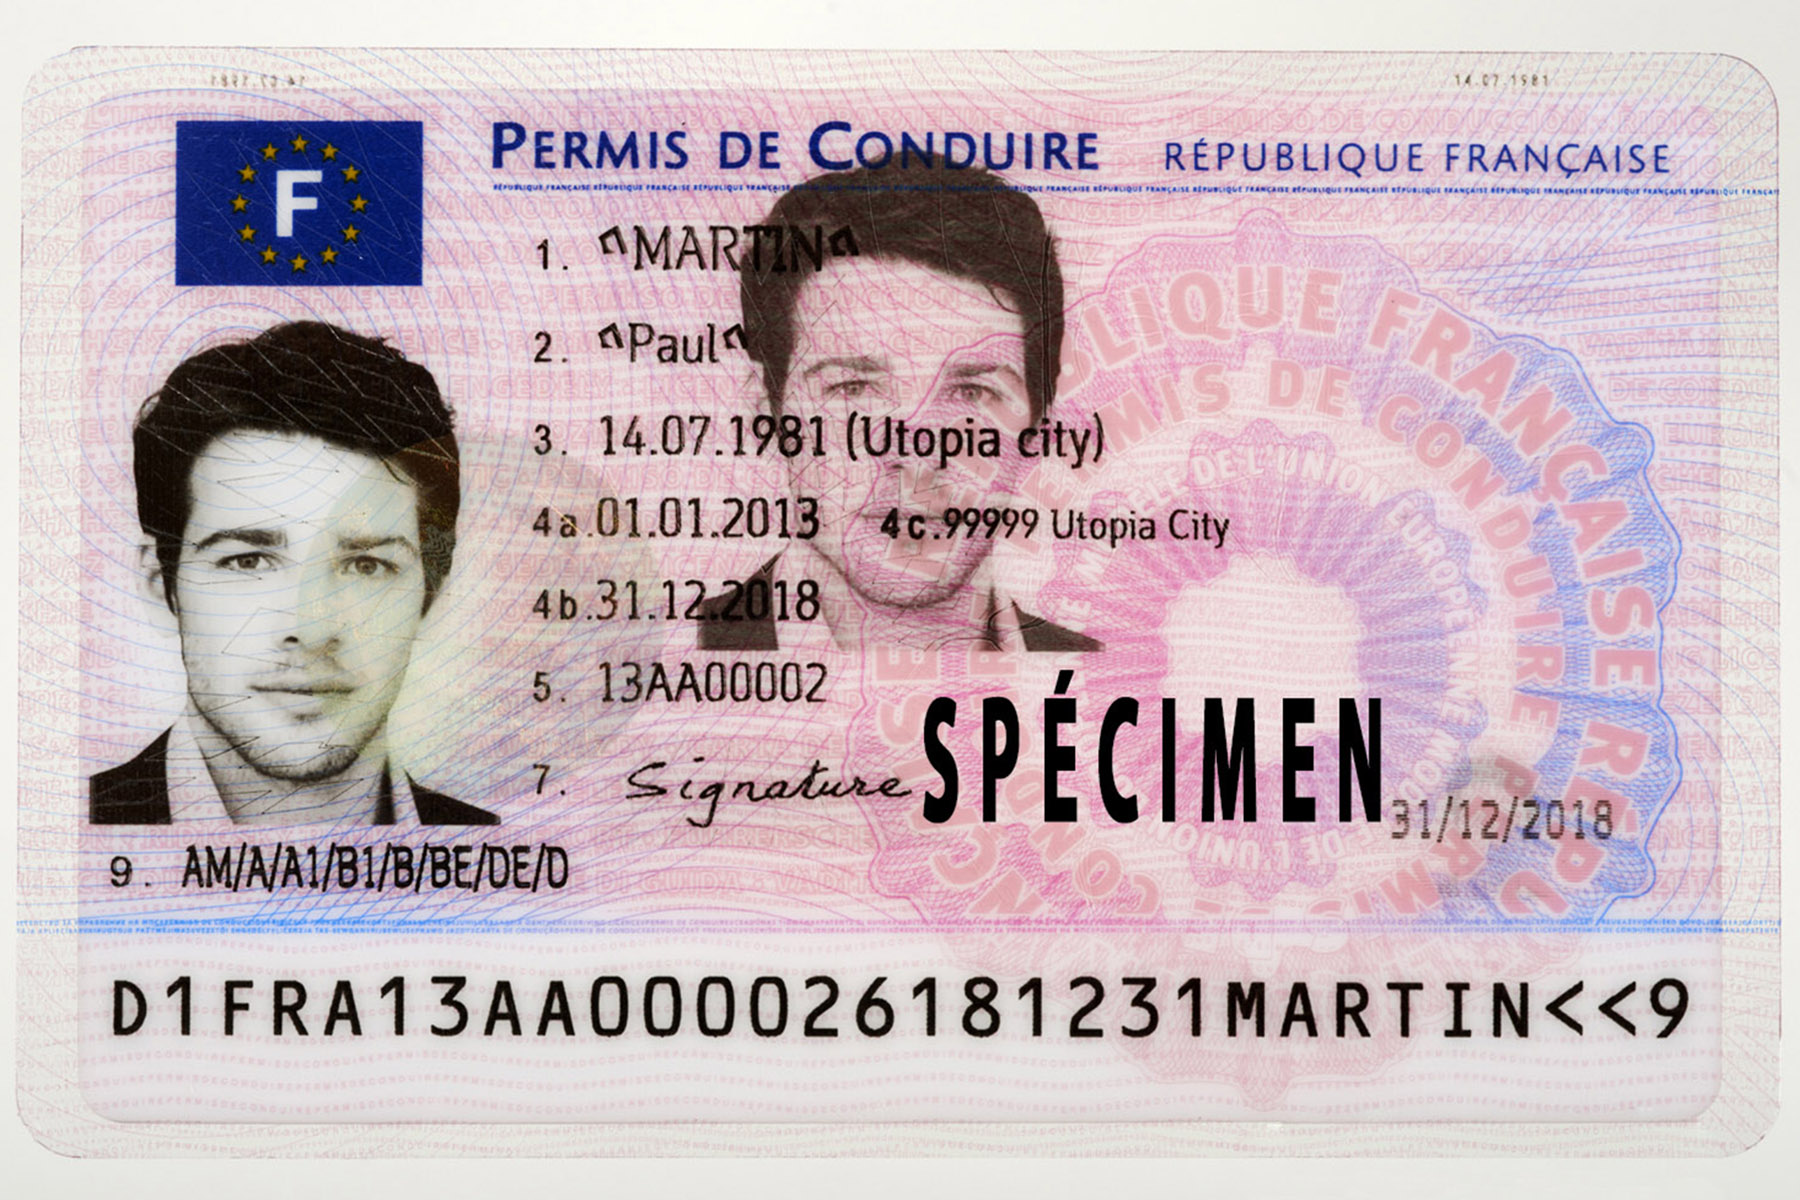 Example of French driver's license.